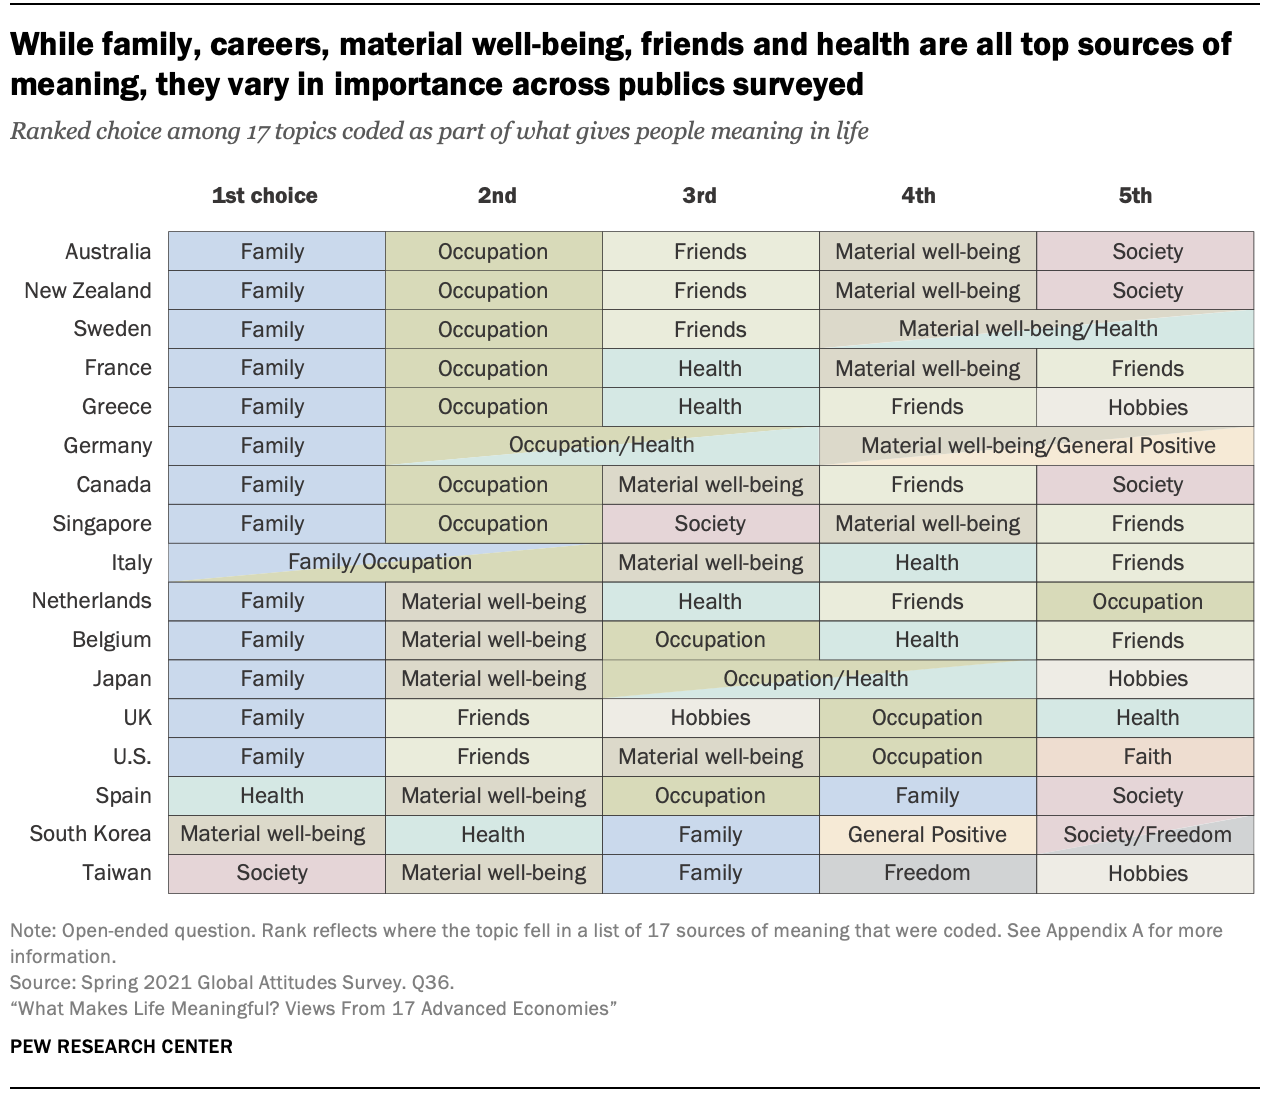 While family, careers, material well-being, friends and health are all top sources of meaning, they vary in importance across publics surveyed